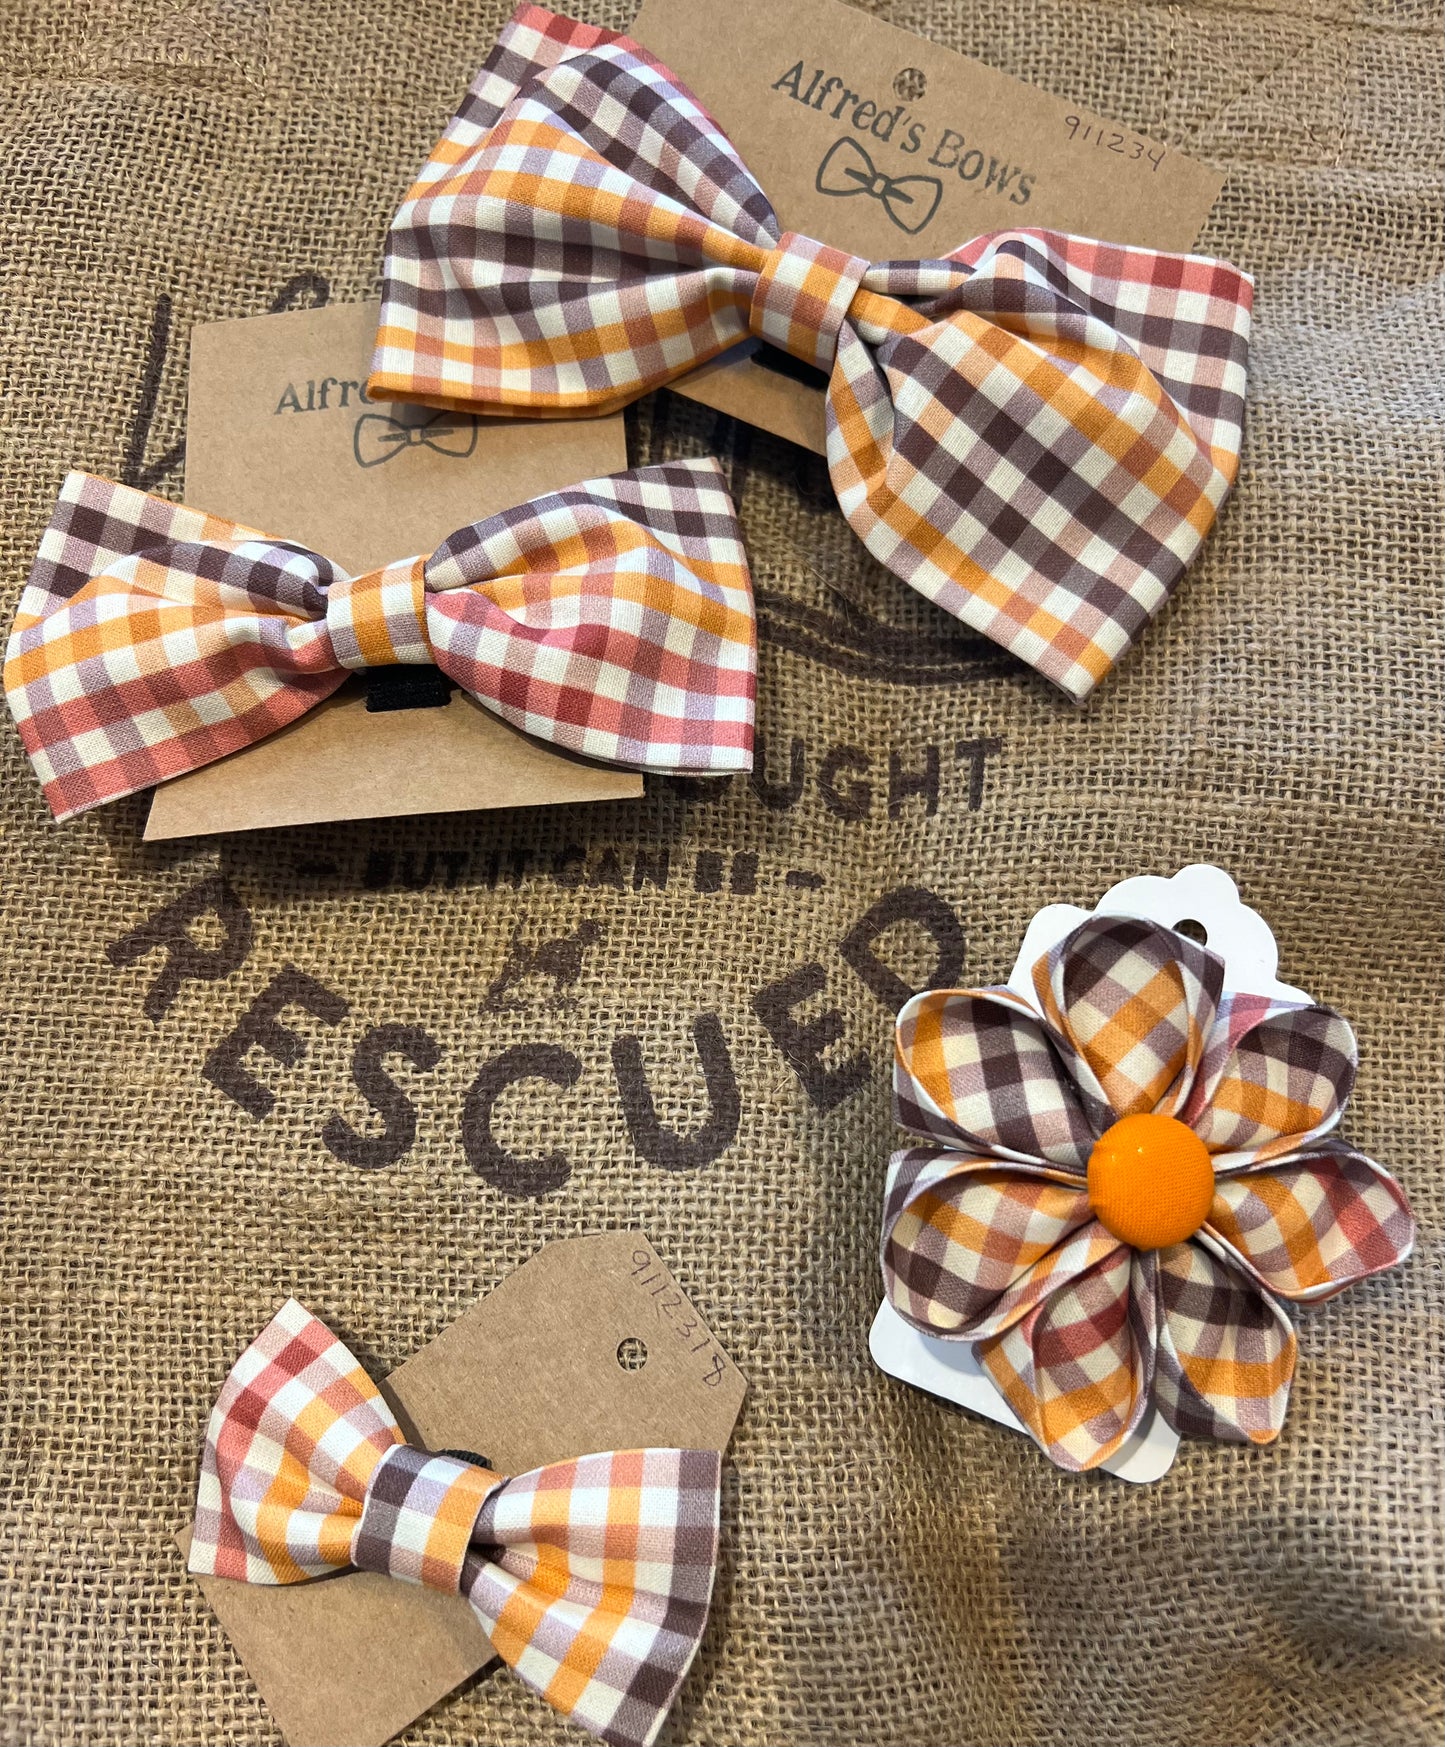 Alfred's Bows "Fall Gingham" Large Bow